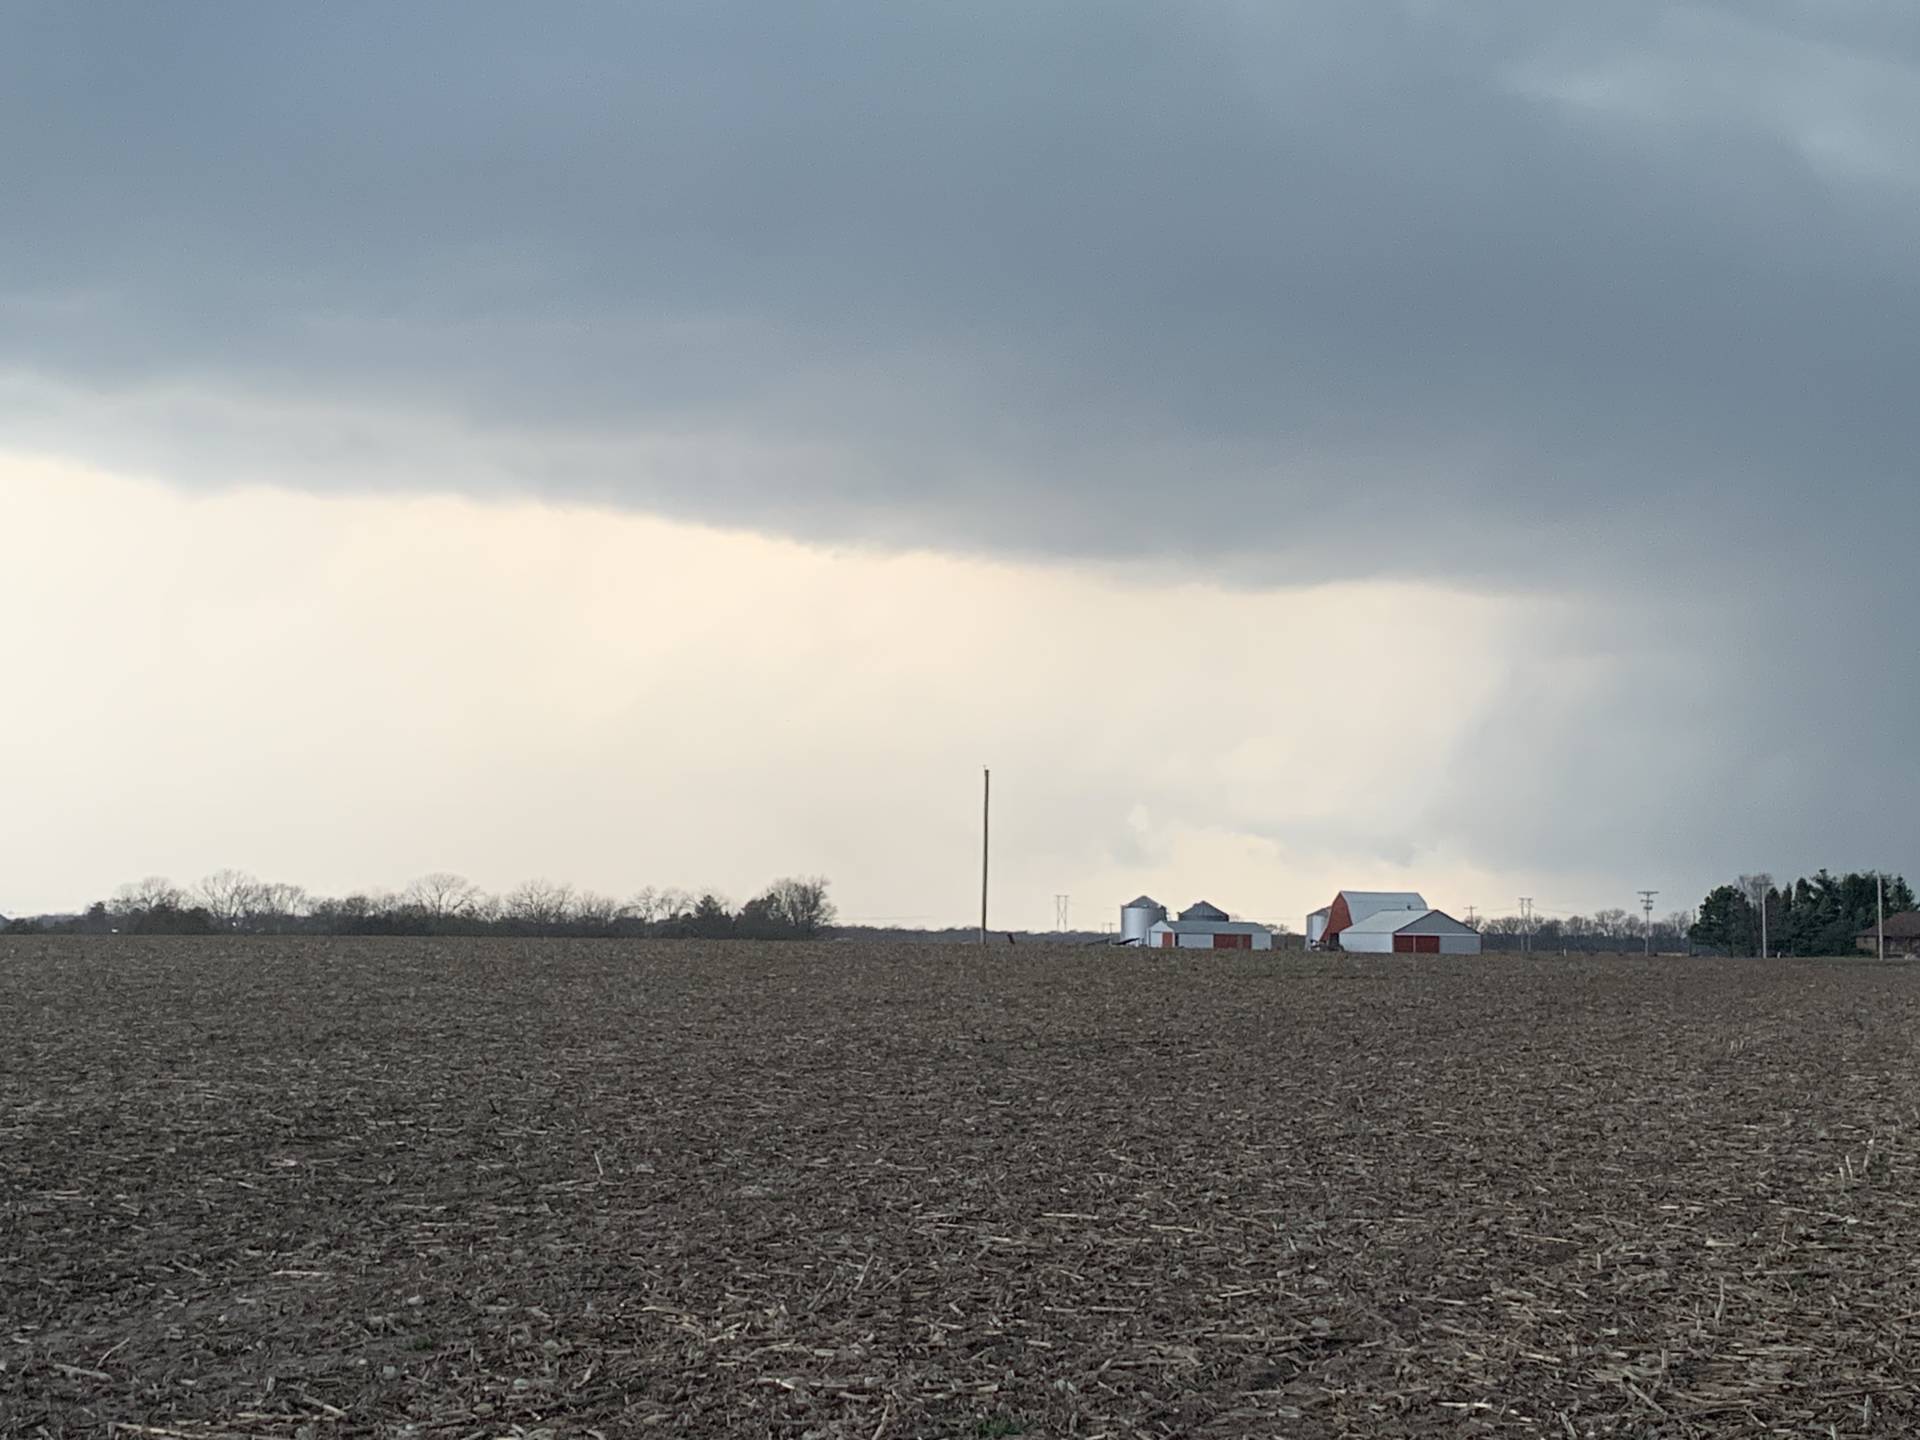 Rope funnel slithering away near Ipava, IL @NWSLincolnIL I have had at least one brief tornado. Multiple circulation on this